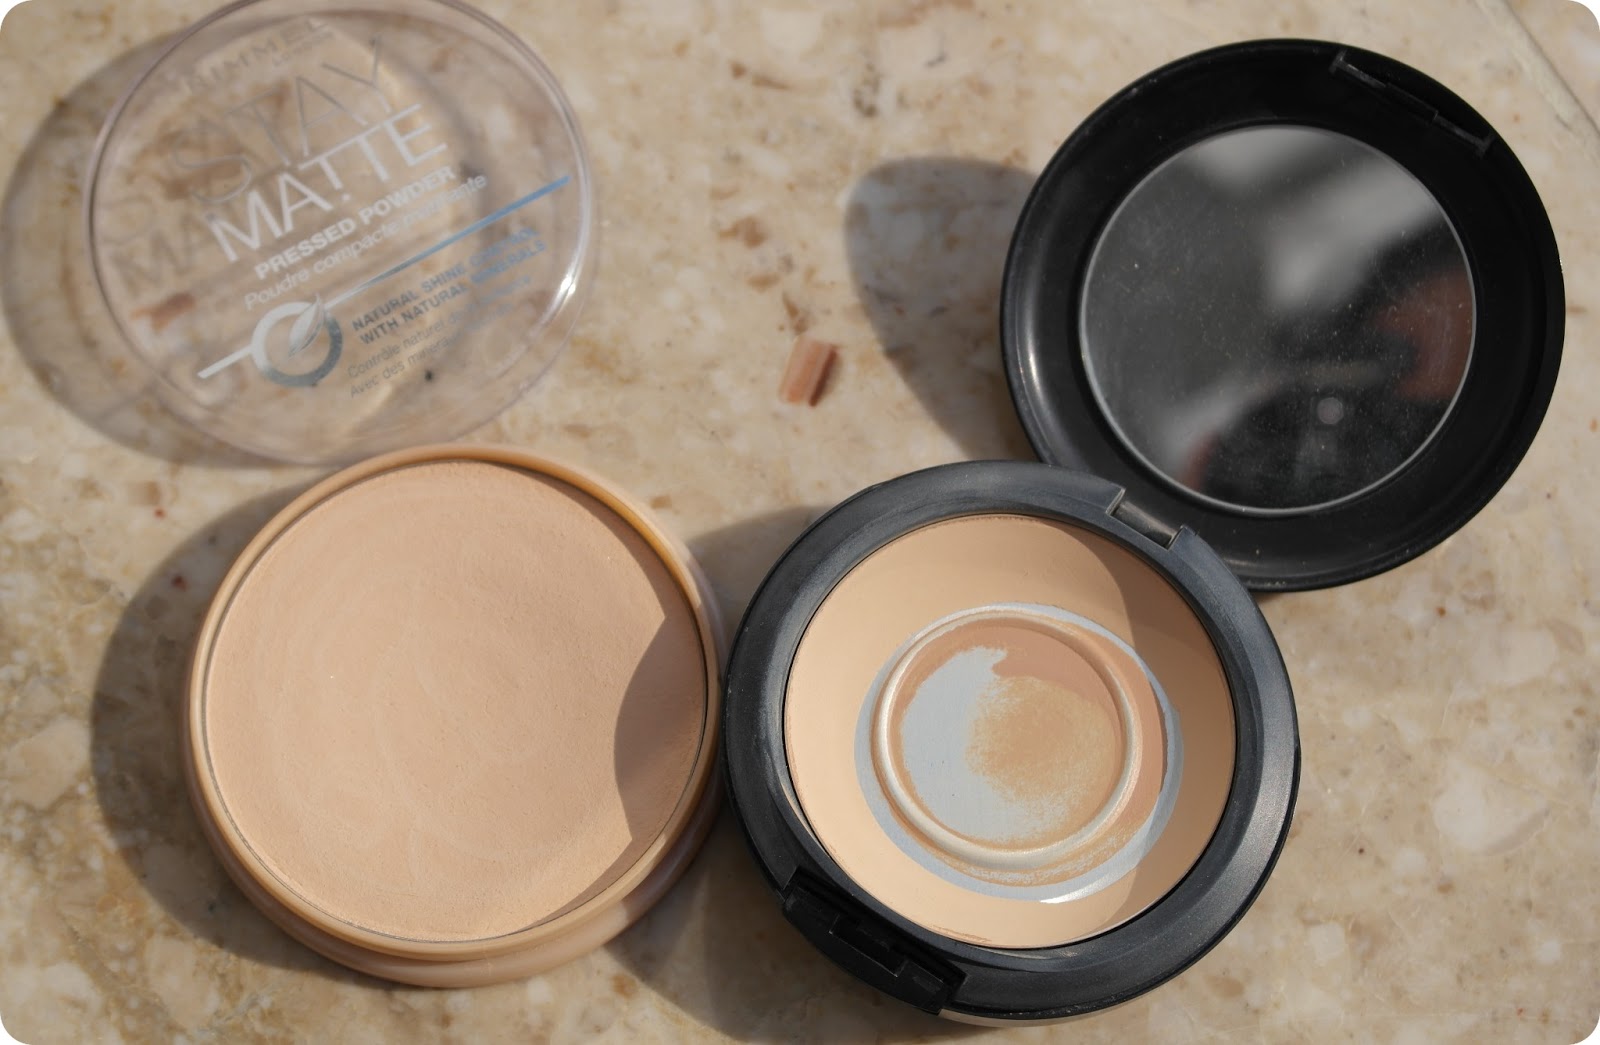 Rimmel Stay Matte Pressed Powder and MAC Studio Fix Powder Plus Foundation dupe, review and comparison 